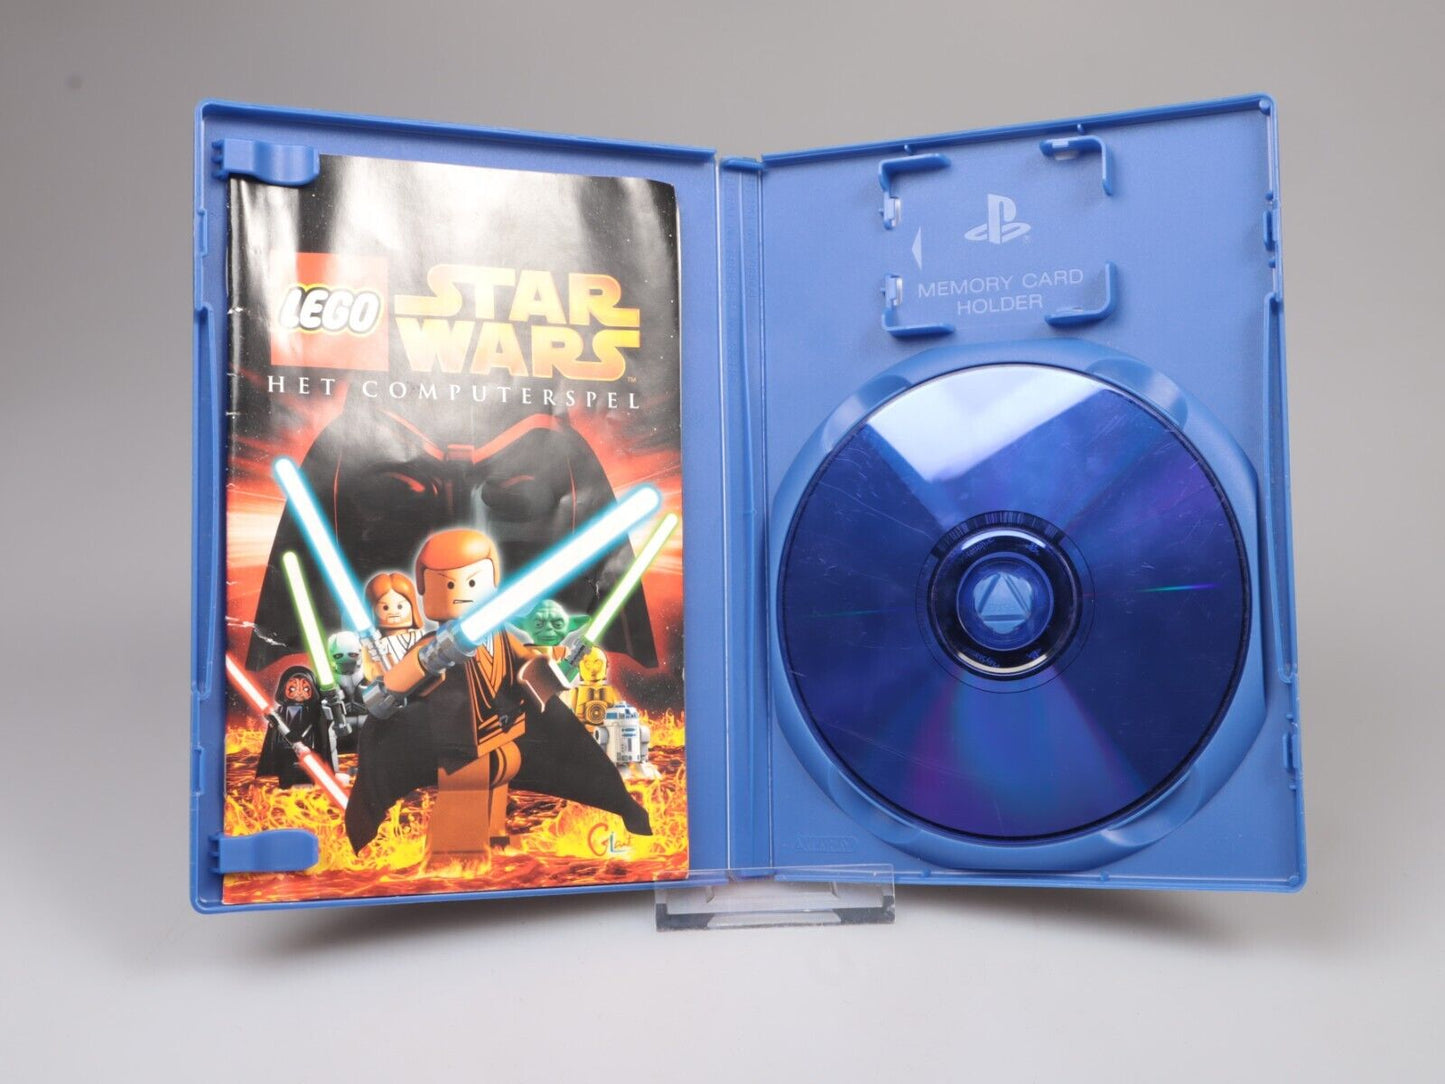 PS2 | LEGO Star Wars: The Videogame (NL) (PAL)